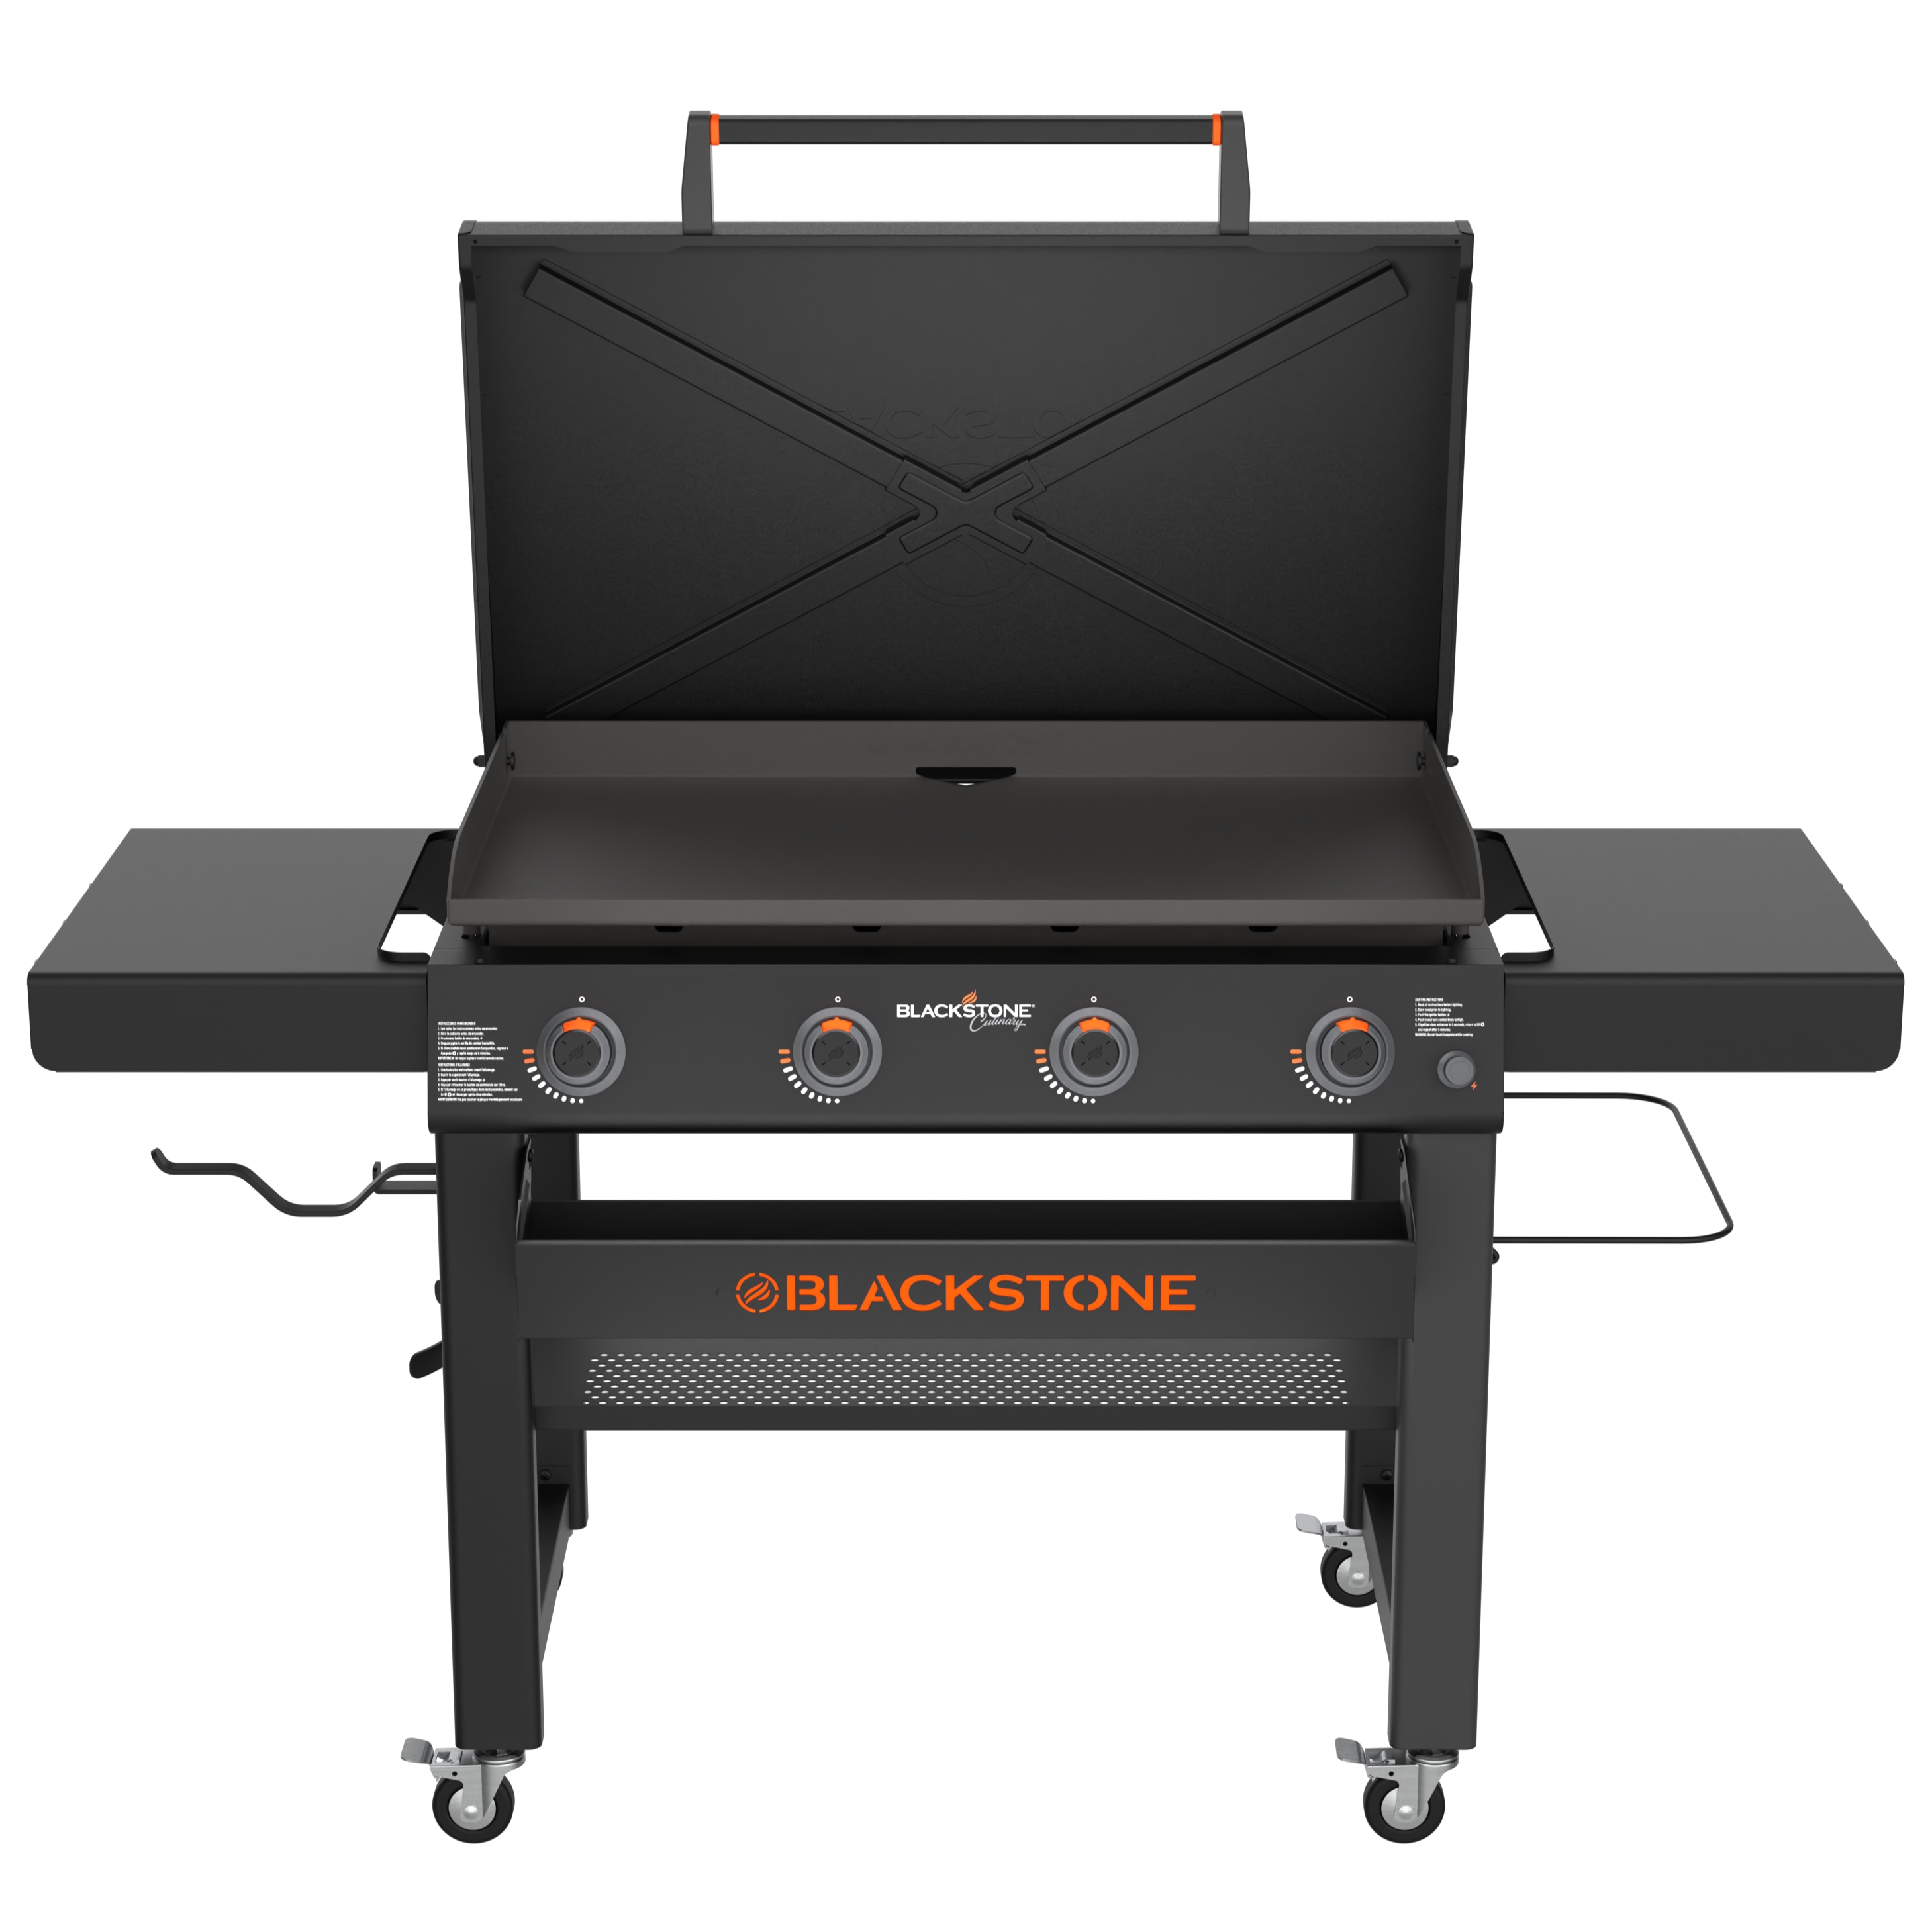 Flat Top Grill vs Gas Grill: Detailed Look At 5 Differences